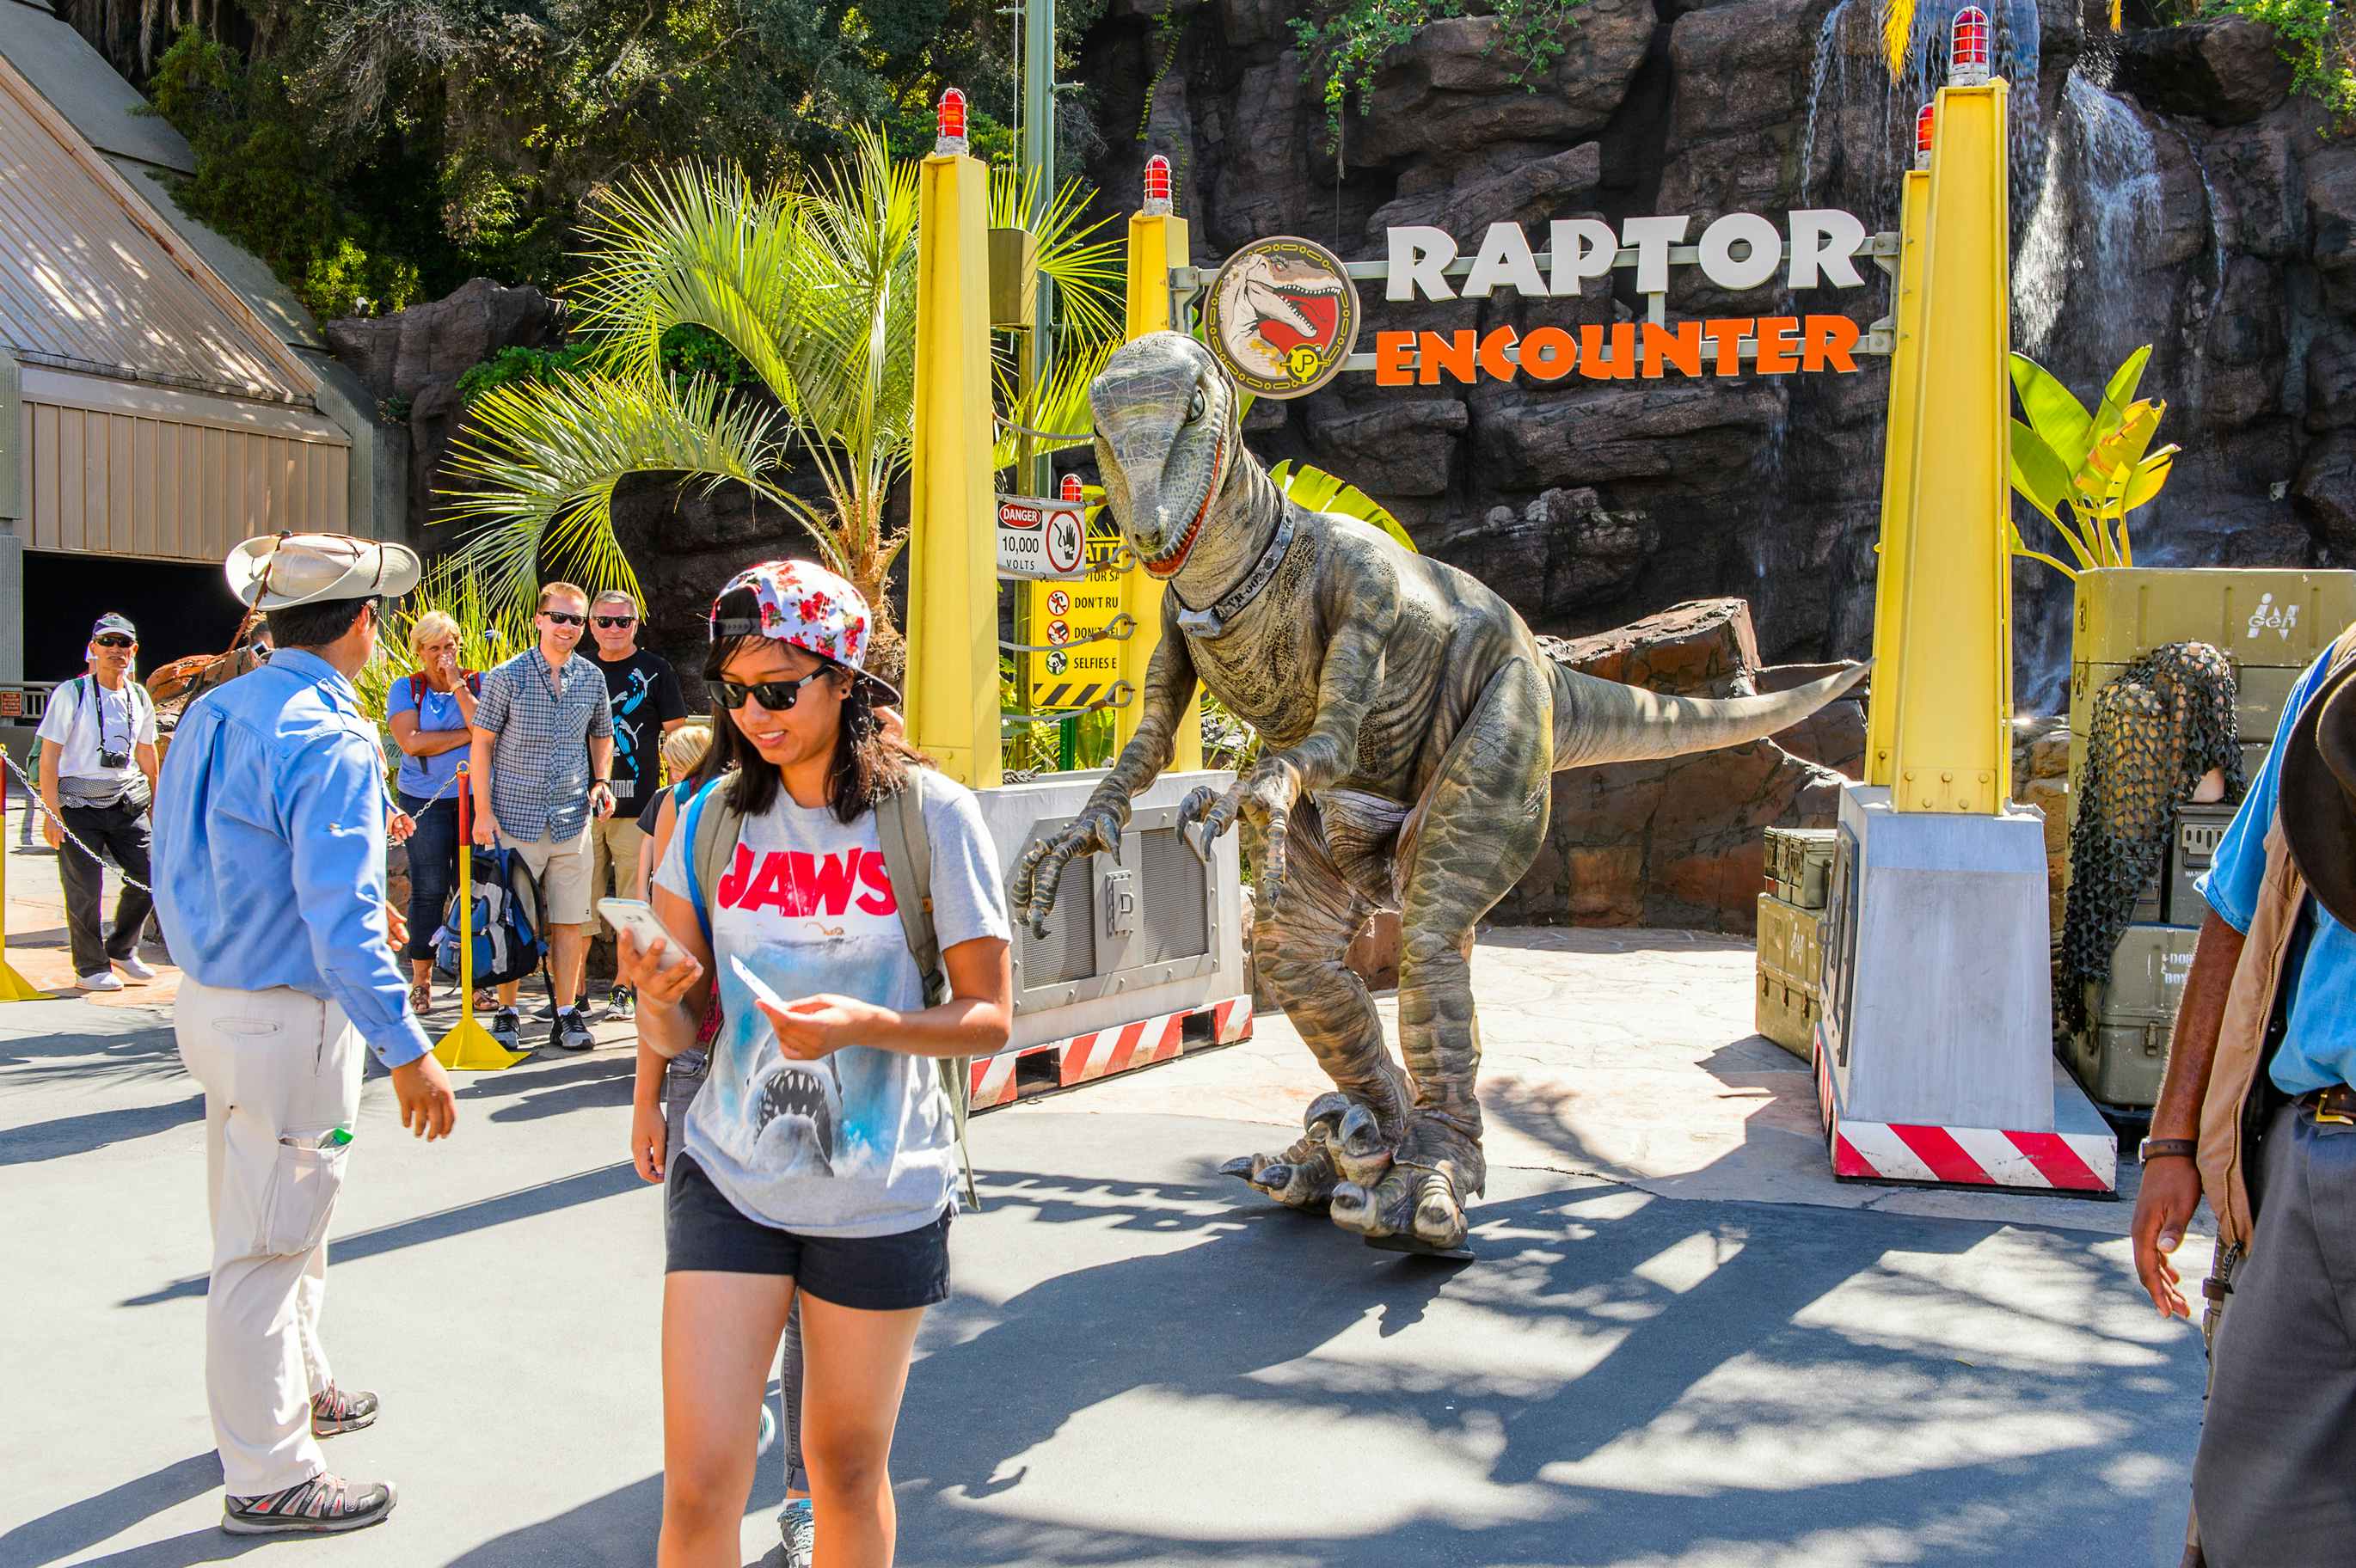 Raptor Encounter experience with Park guests